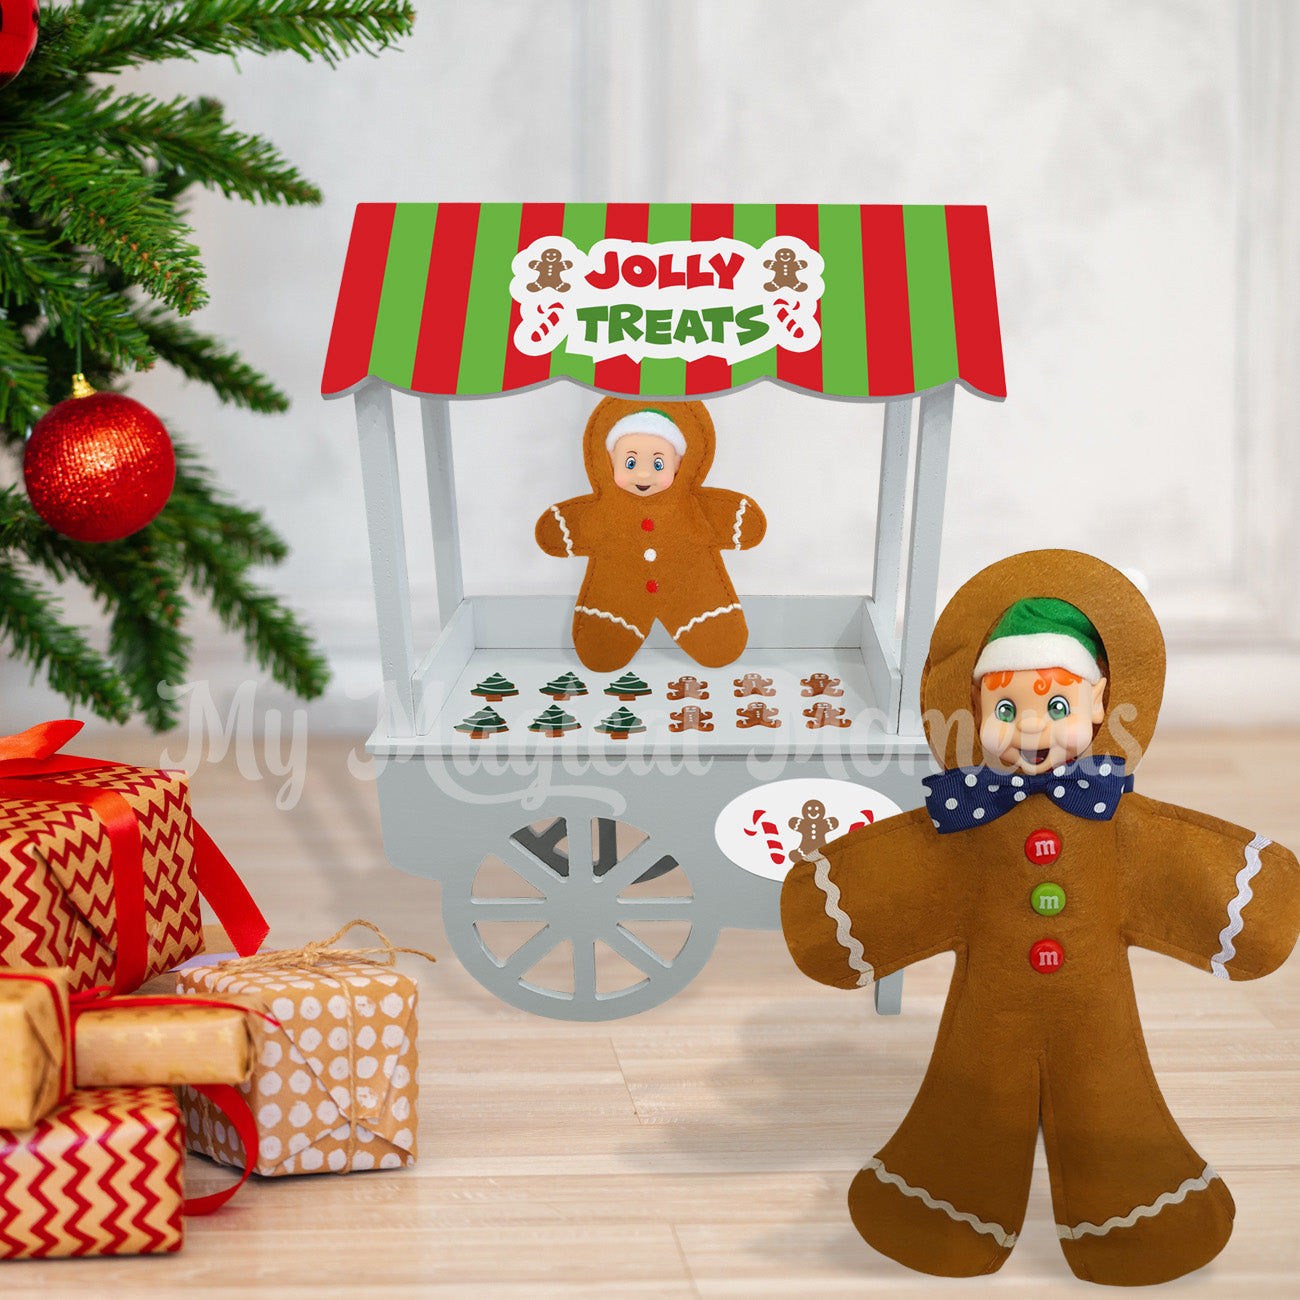 My elf friends wearing a gingerbread costume selling baby elf gingerbread cookies on a jolly treats cart